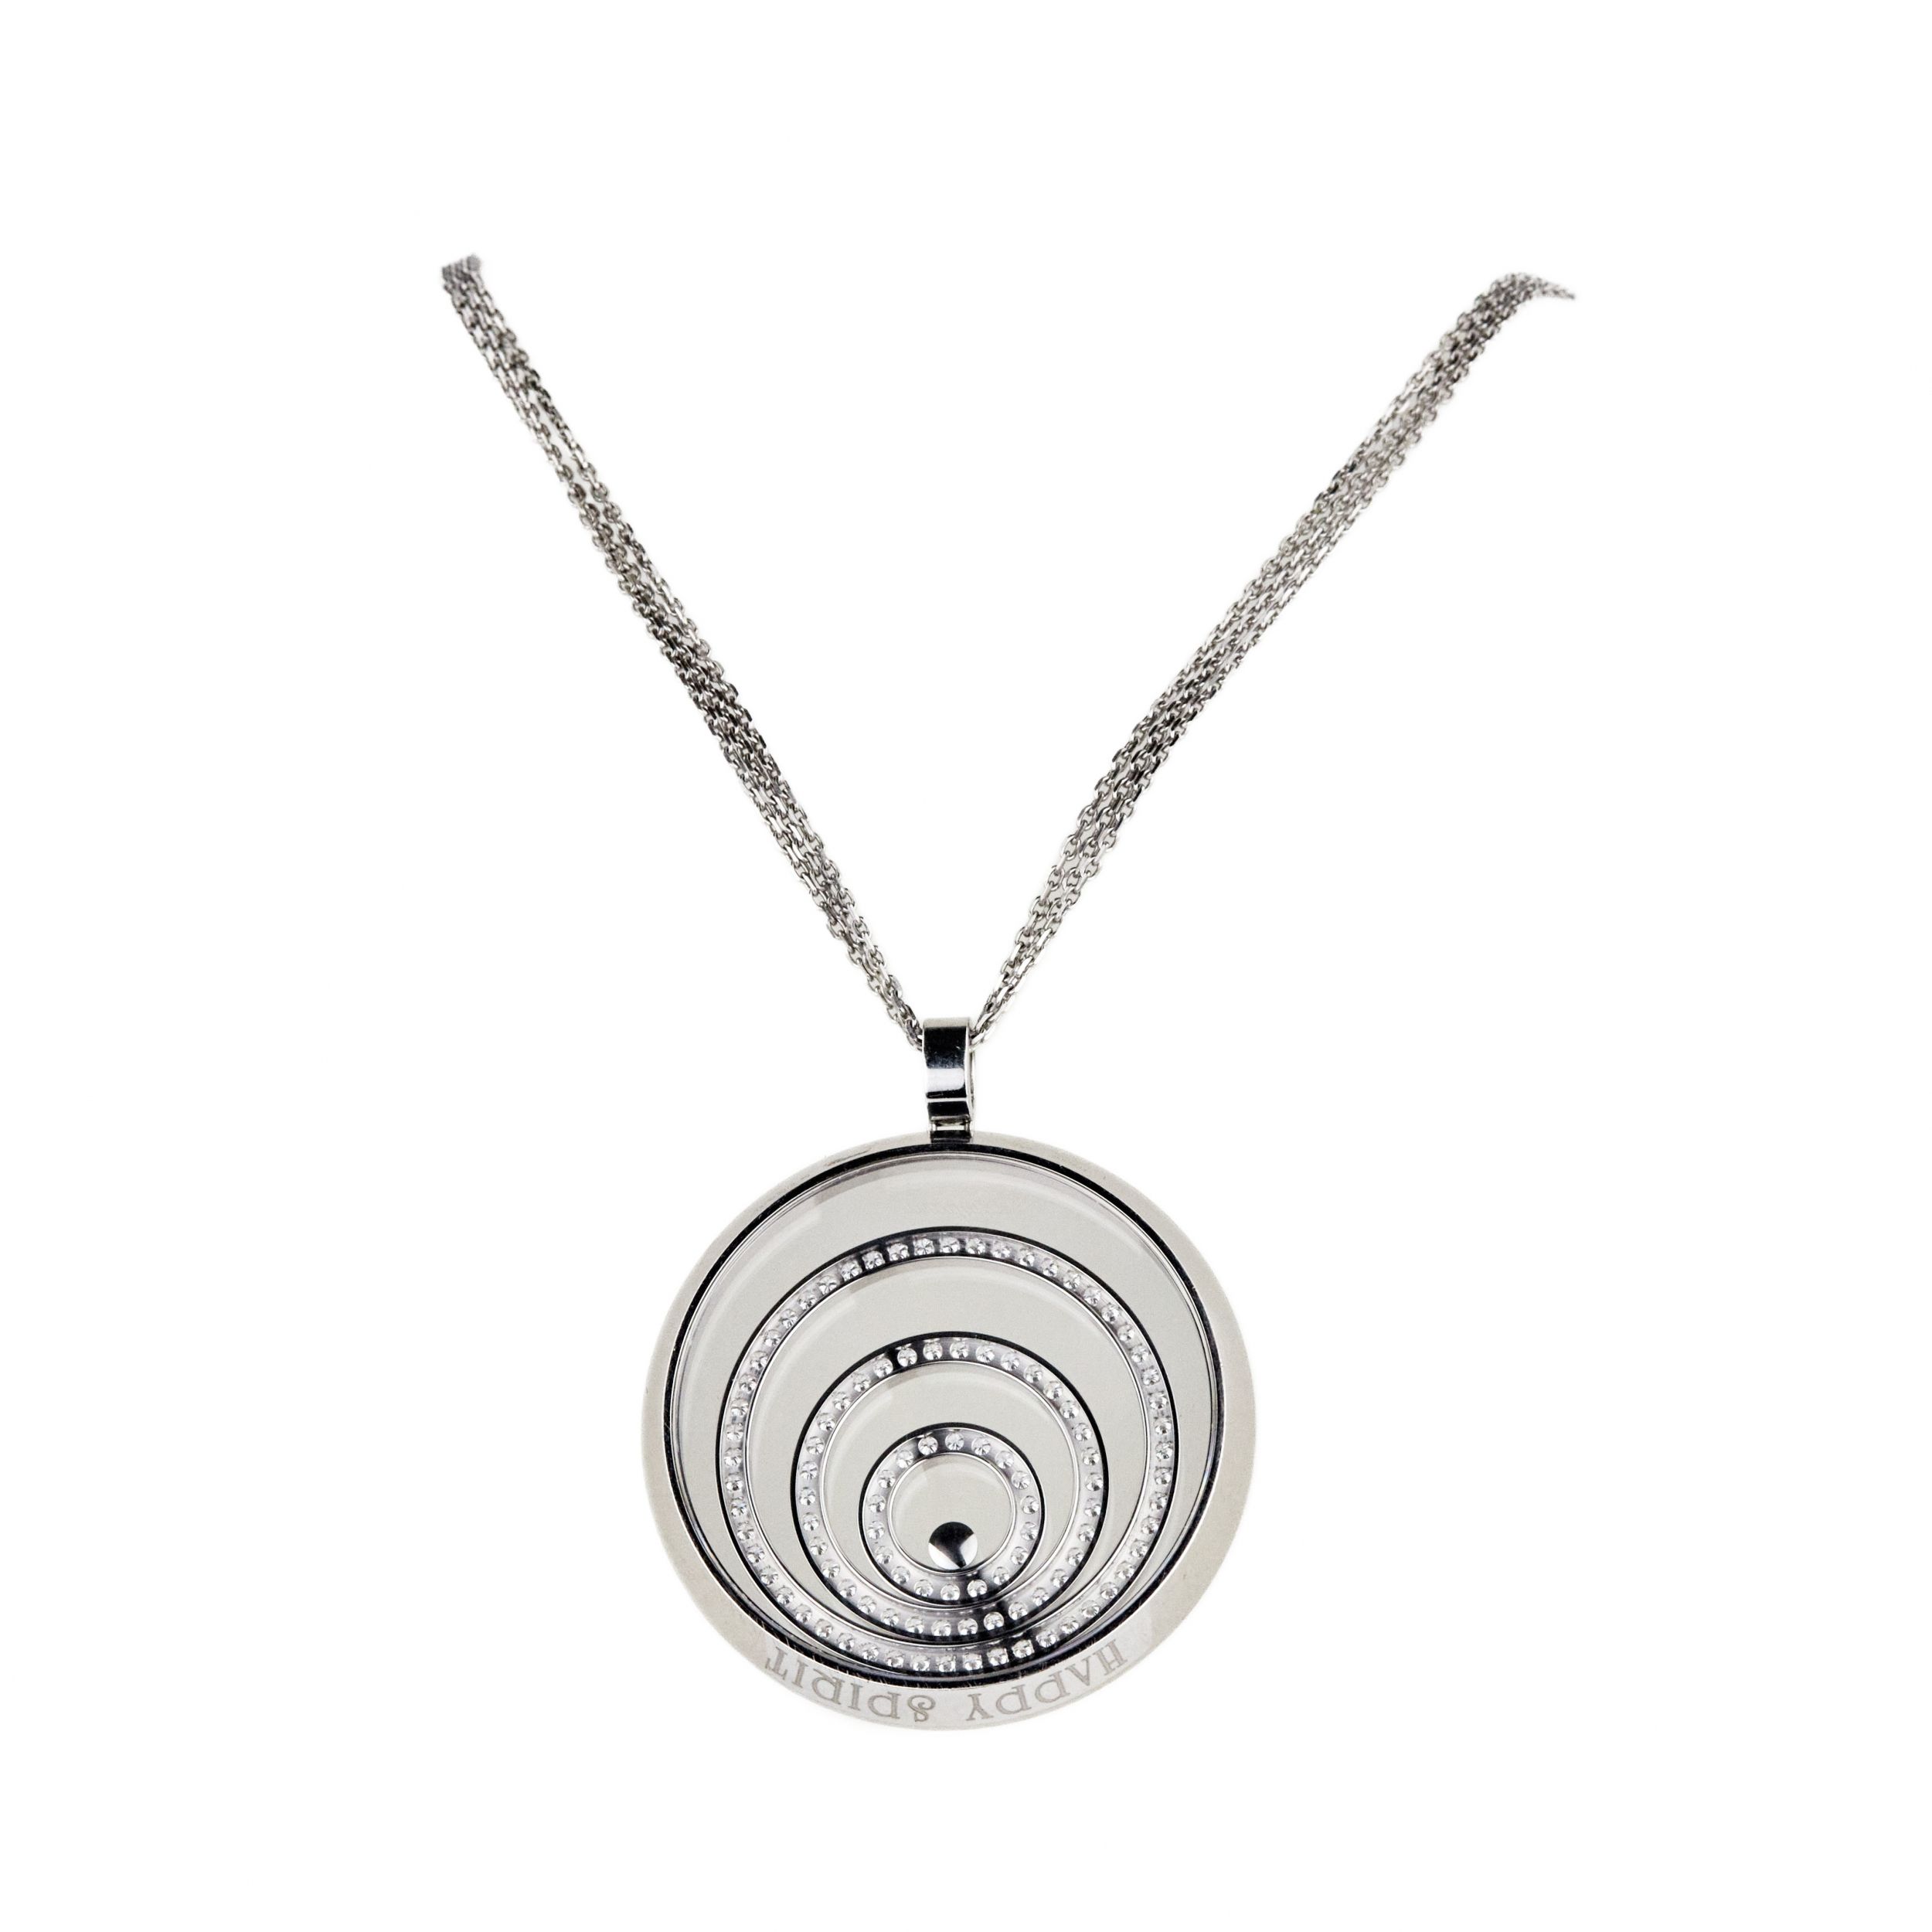 Chopard white gold pendant with diamonds. - Image 3 of 10